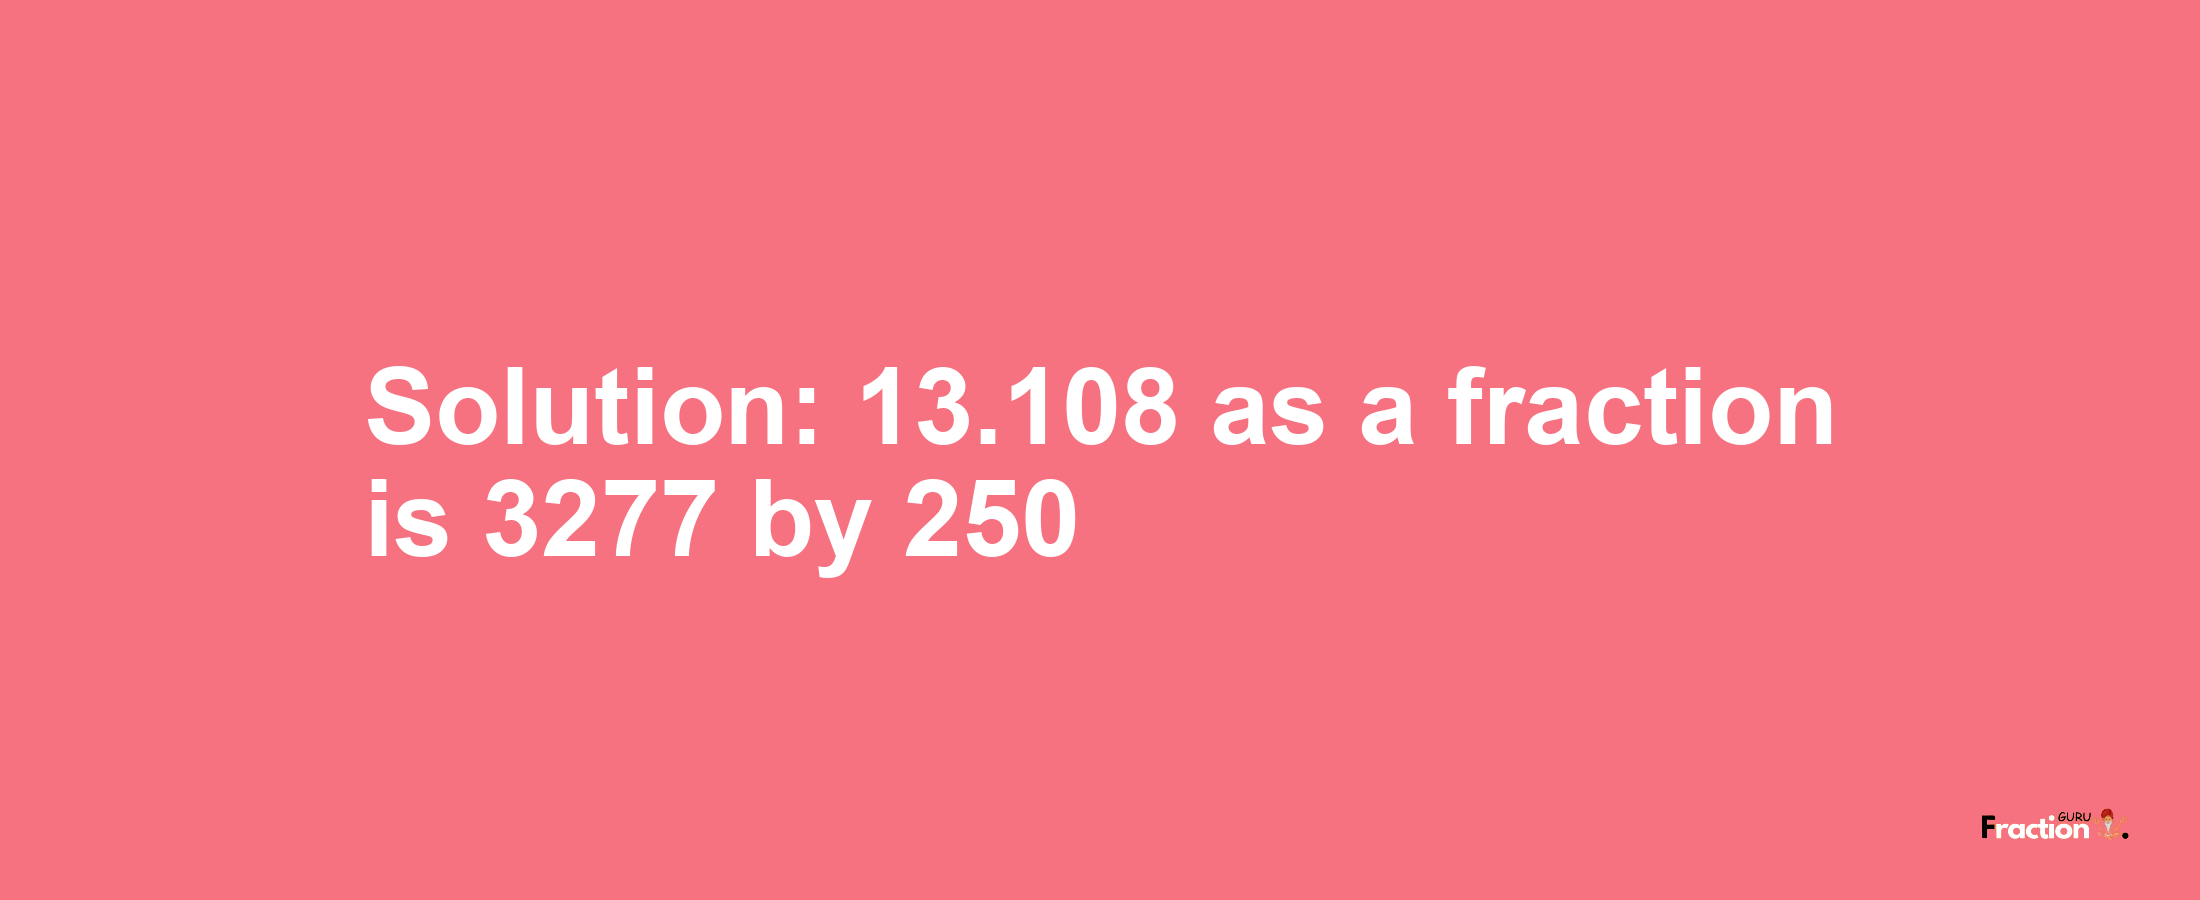 Solution:13.108 as a fraction is 3277/250